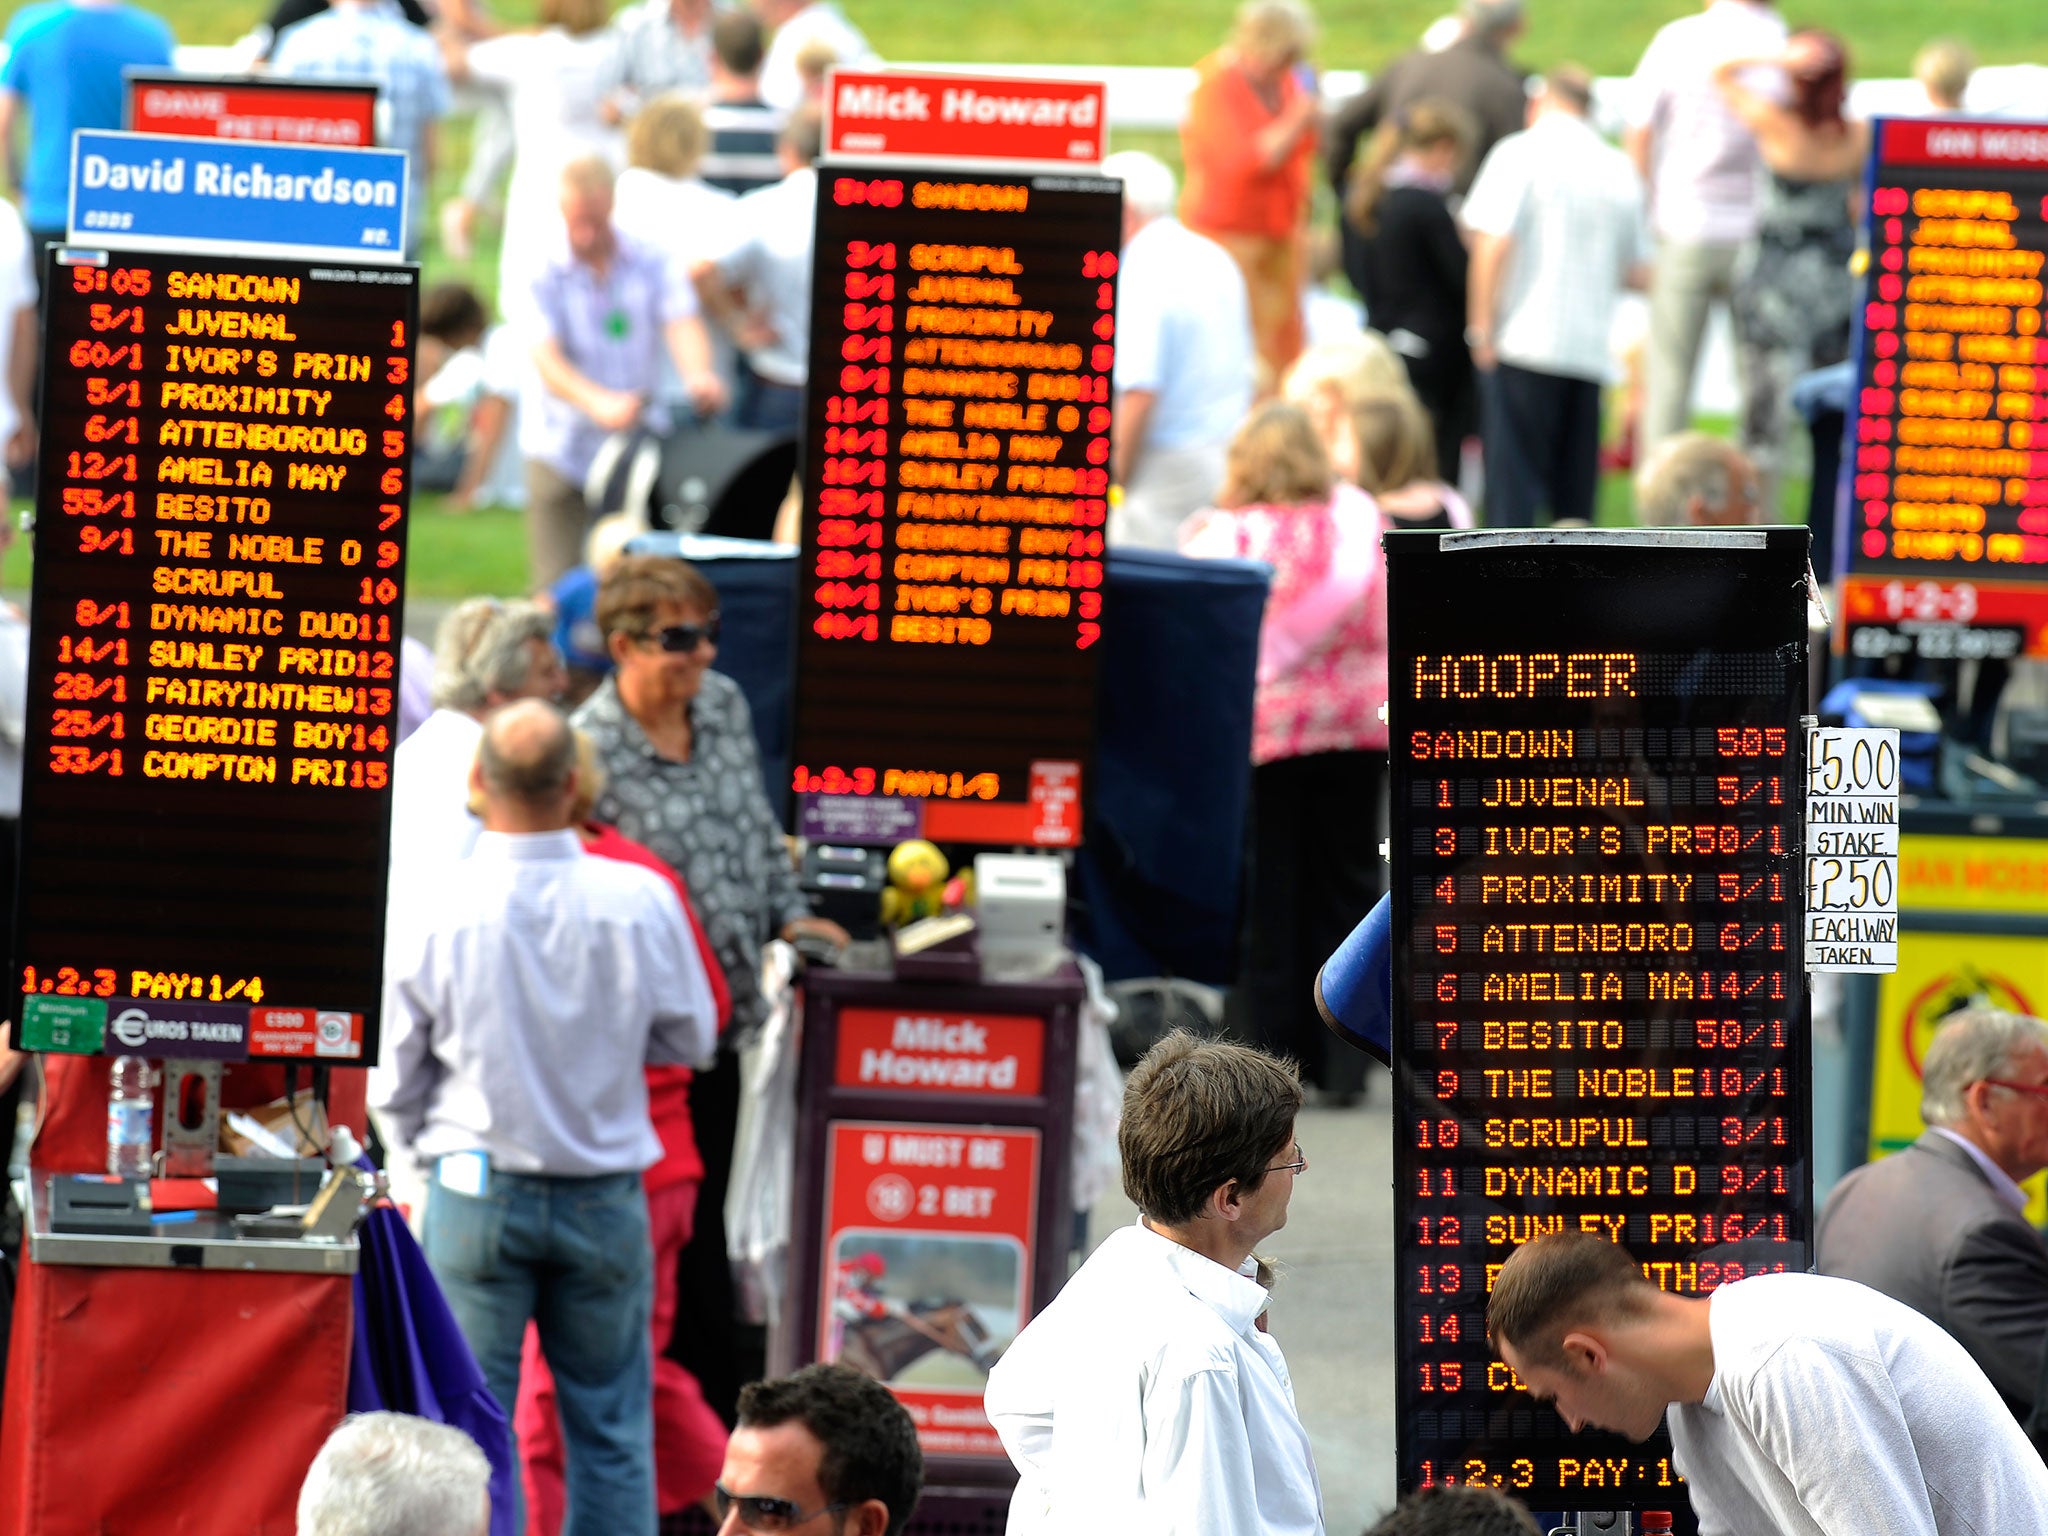 Bookmakers gather beside the track at the 2015 Grand National. Could they predict the EU referendum result?